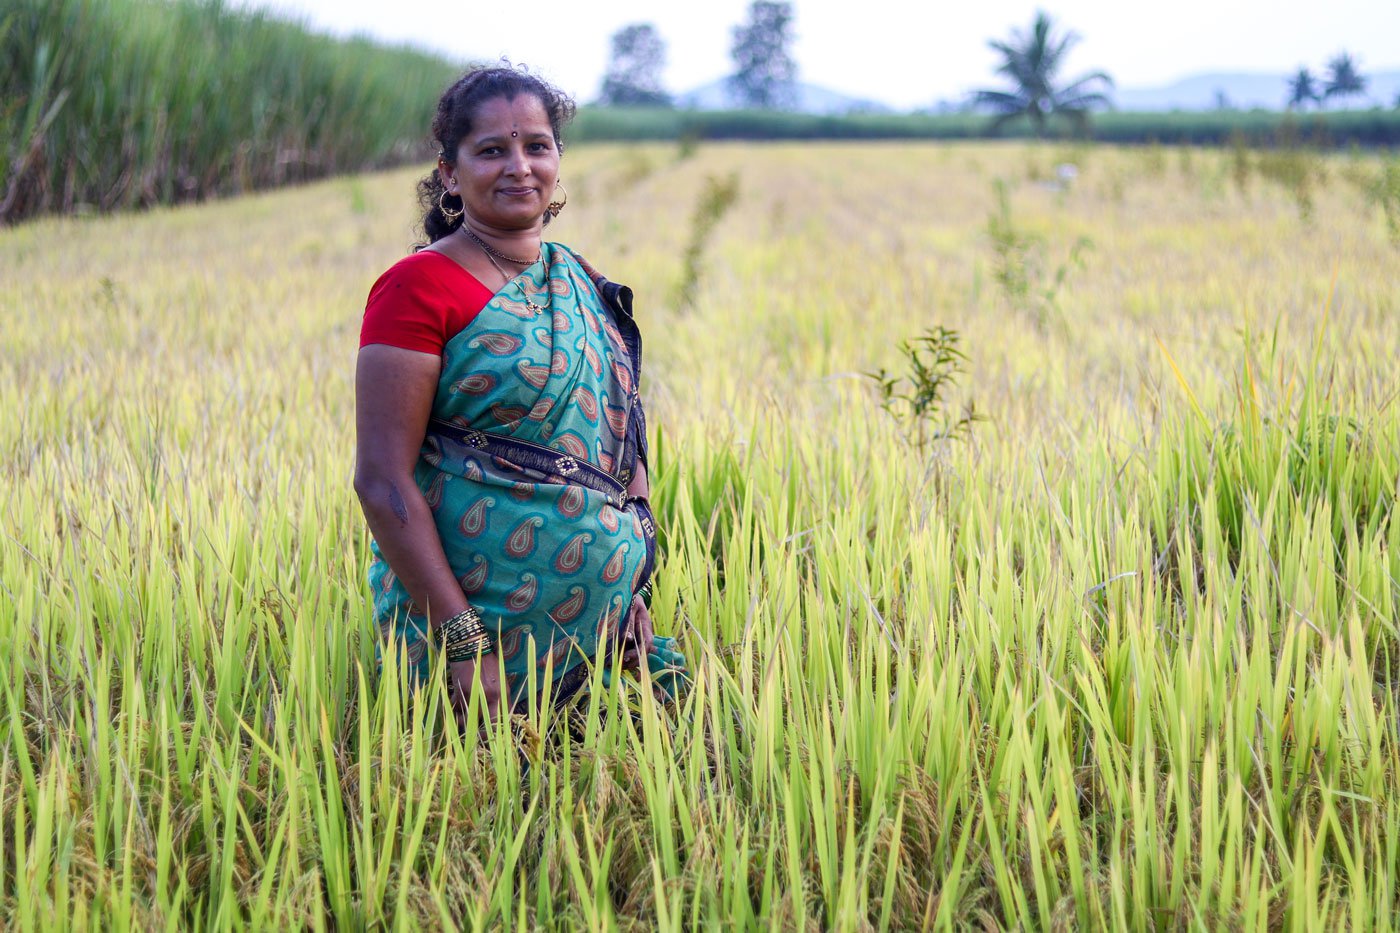 Geeta Patil was diagnosed with hyperthyroidism after the 2021 floods. 'I was never this weak. I don’t know what is happening to my health now,' says the says tenant farmer and agricultural labourer